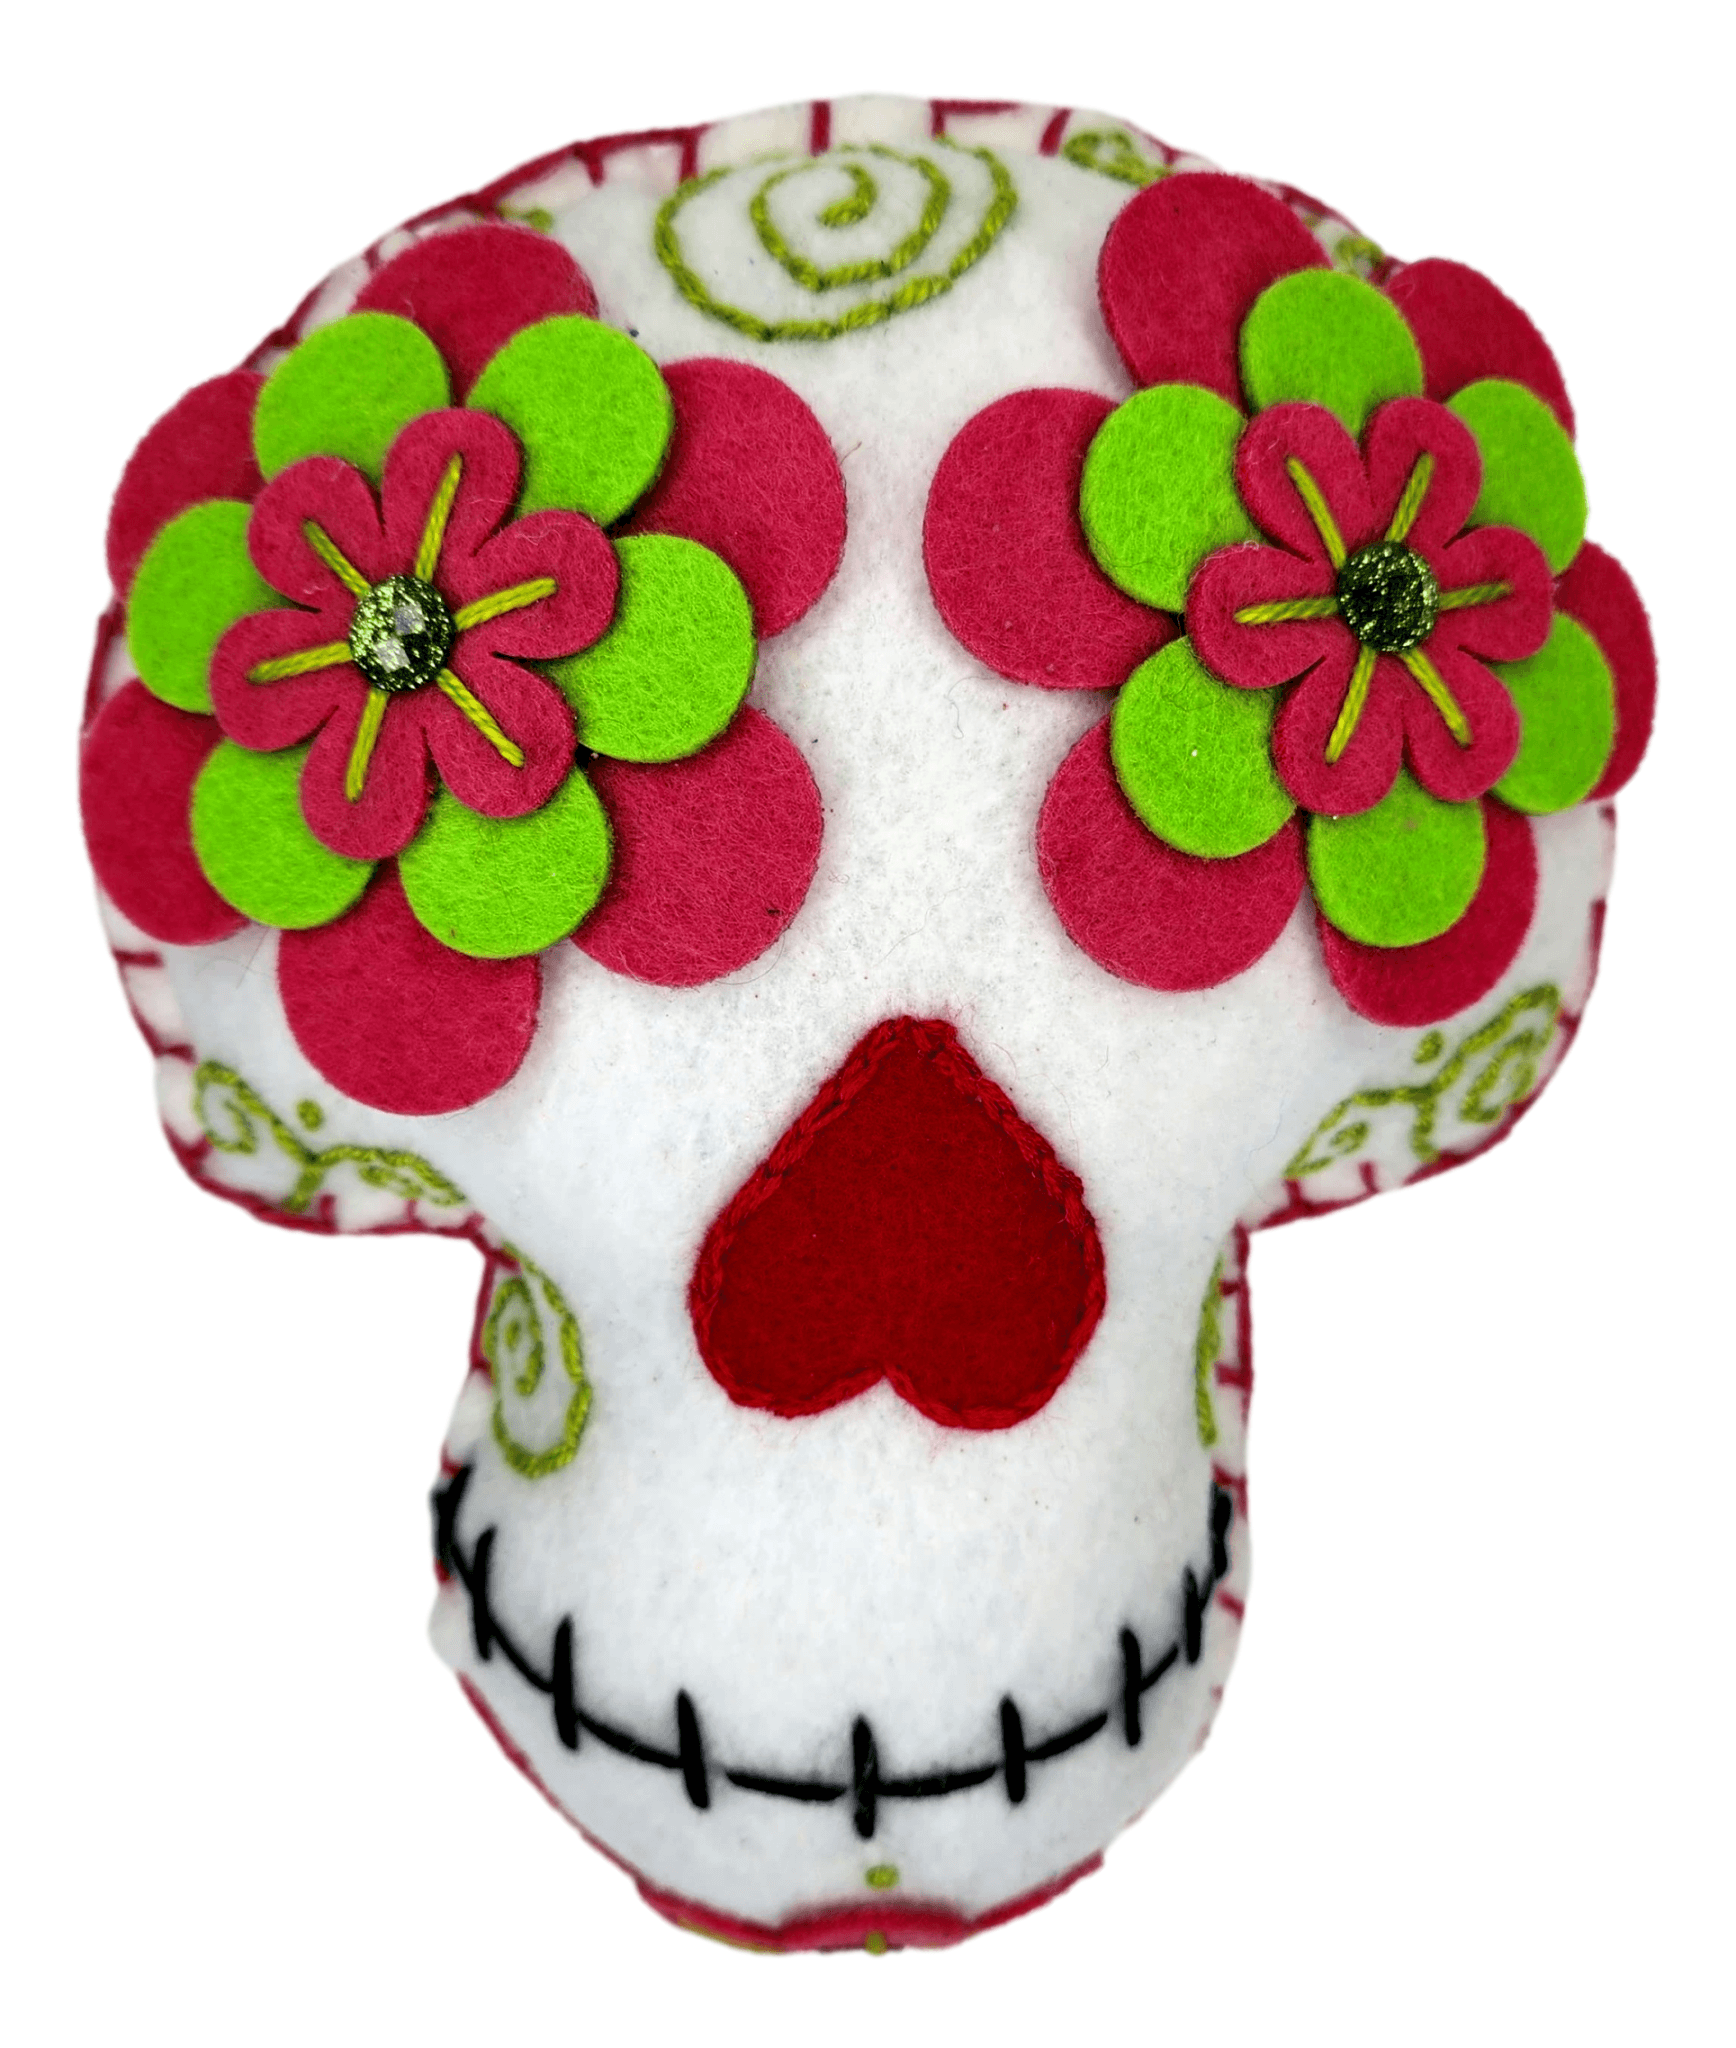 Day of the Dead Pillow Skull Felt Flower Stitched Eyes Handcrafted By El Paso Artist L:8.5 inches X W: 7 inches - Ysleta Mission Gift Shop- VOTED El Paso's Best Gift Shop